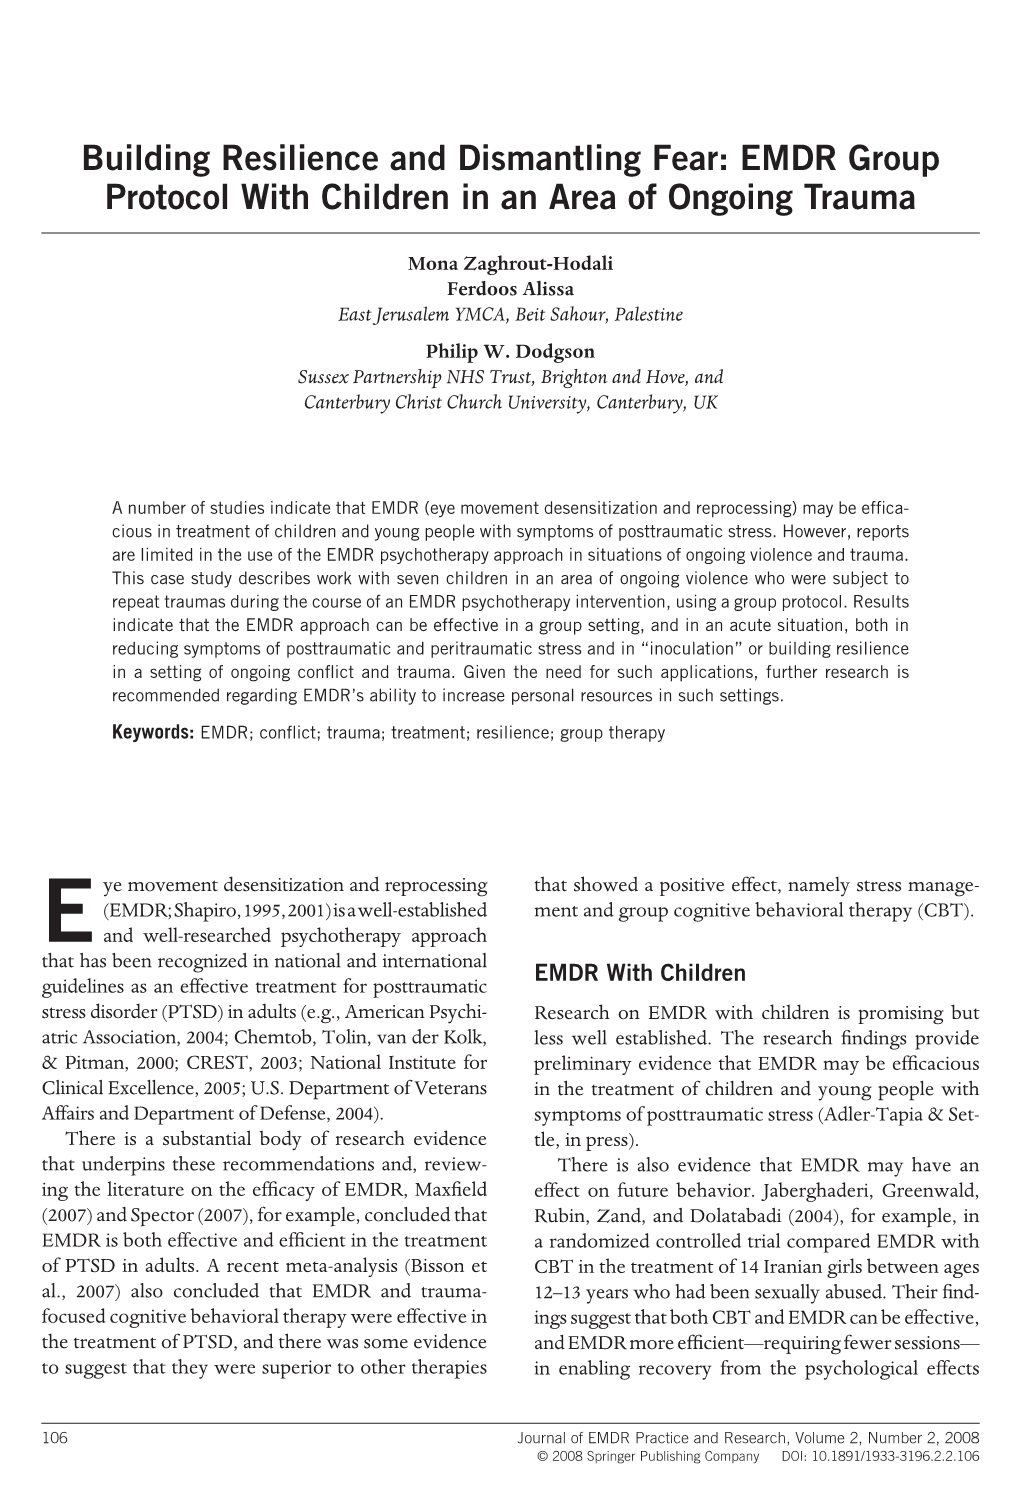 EMDR Group Protocol with Children in an Area of Ongoing Trauma